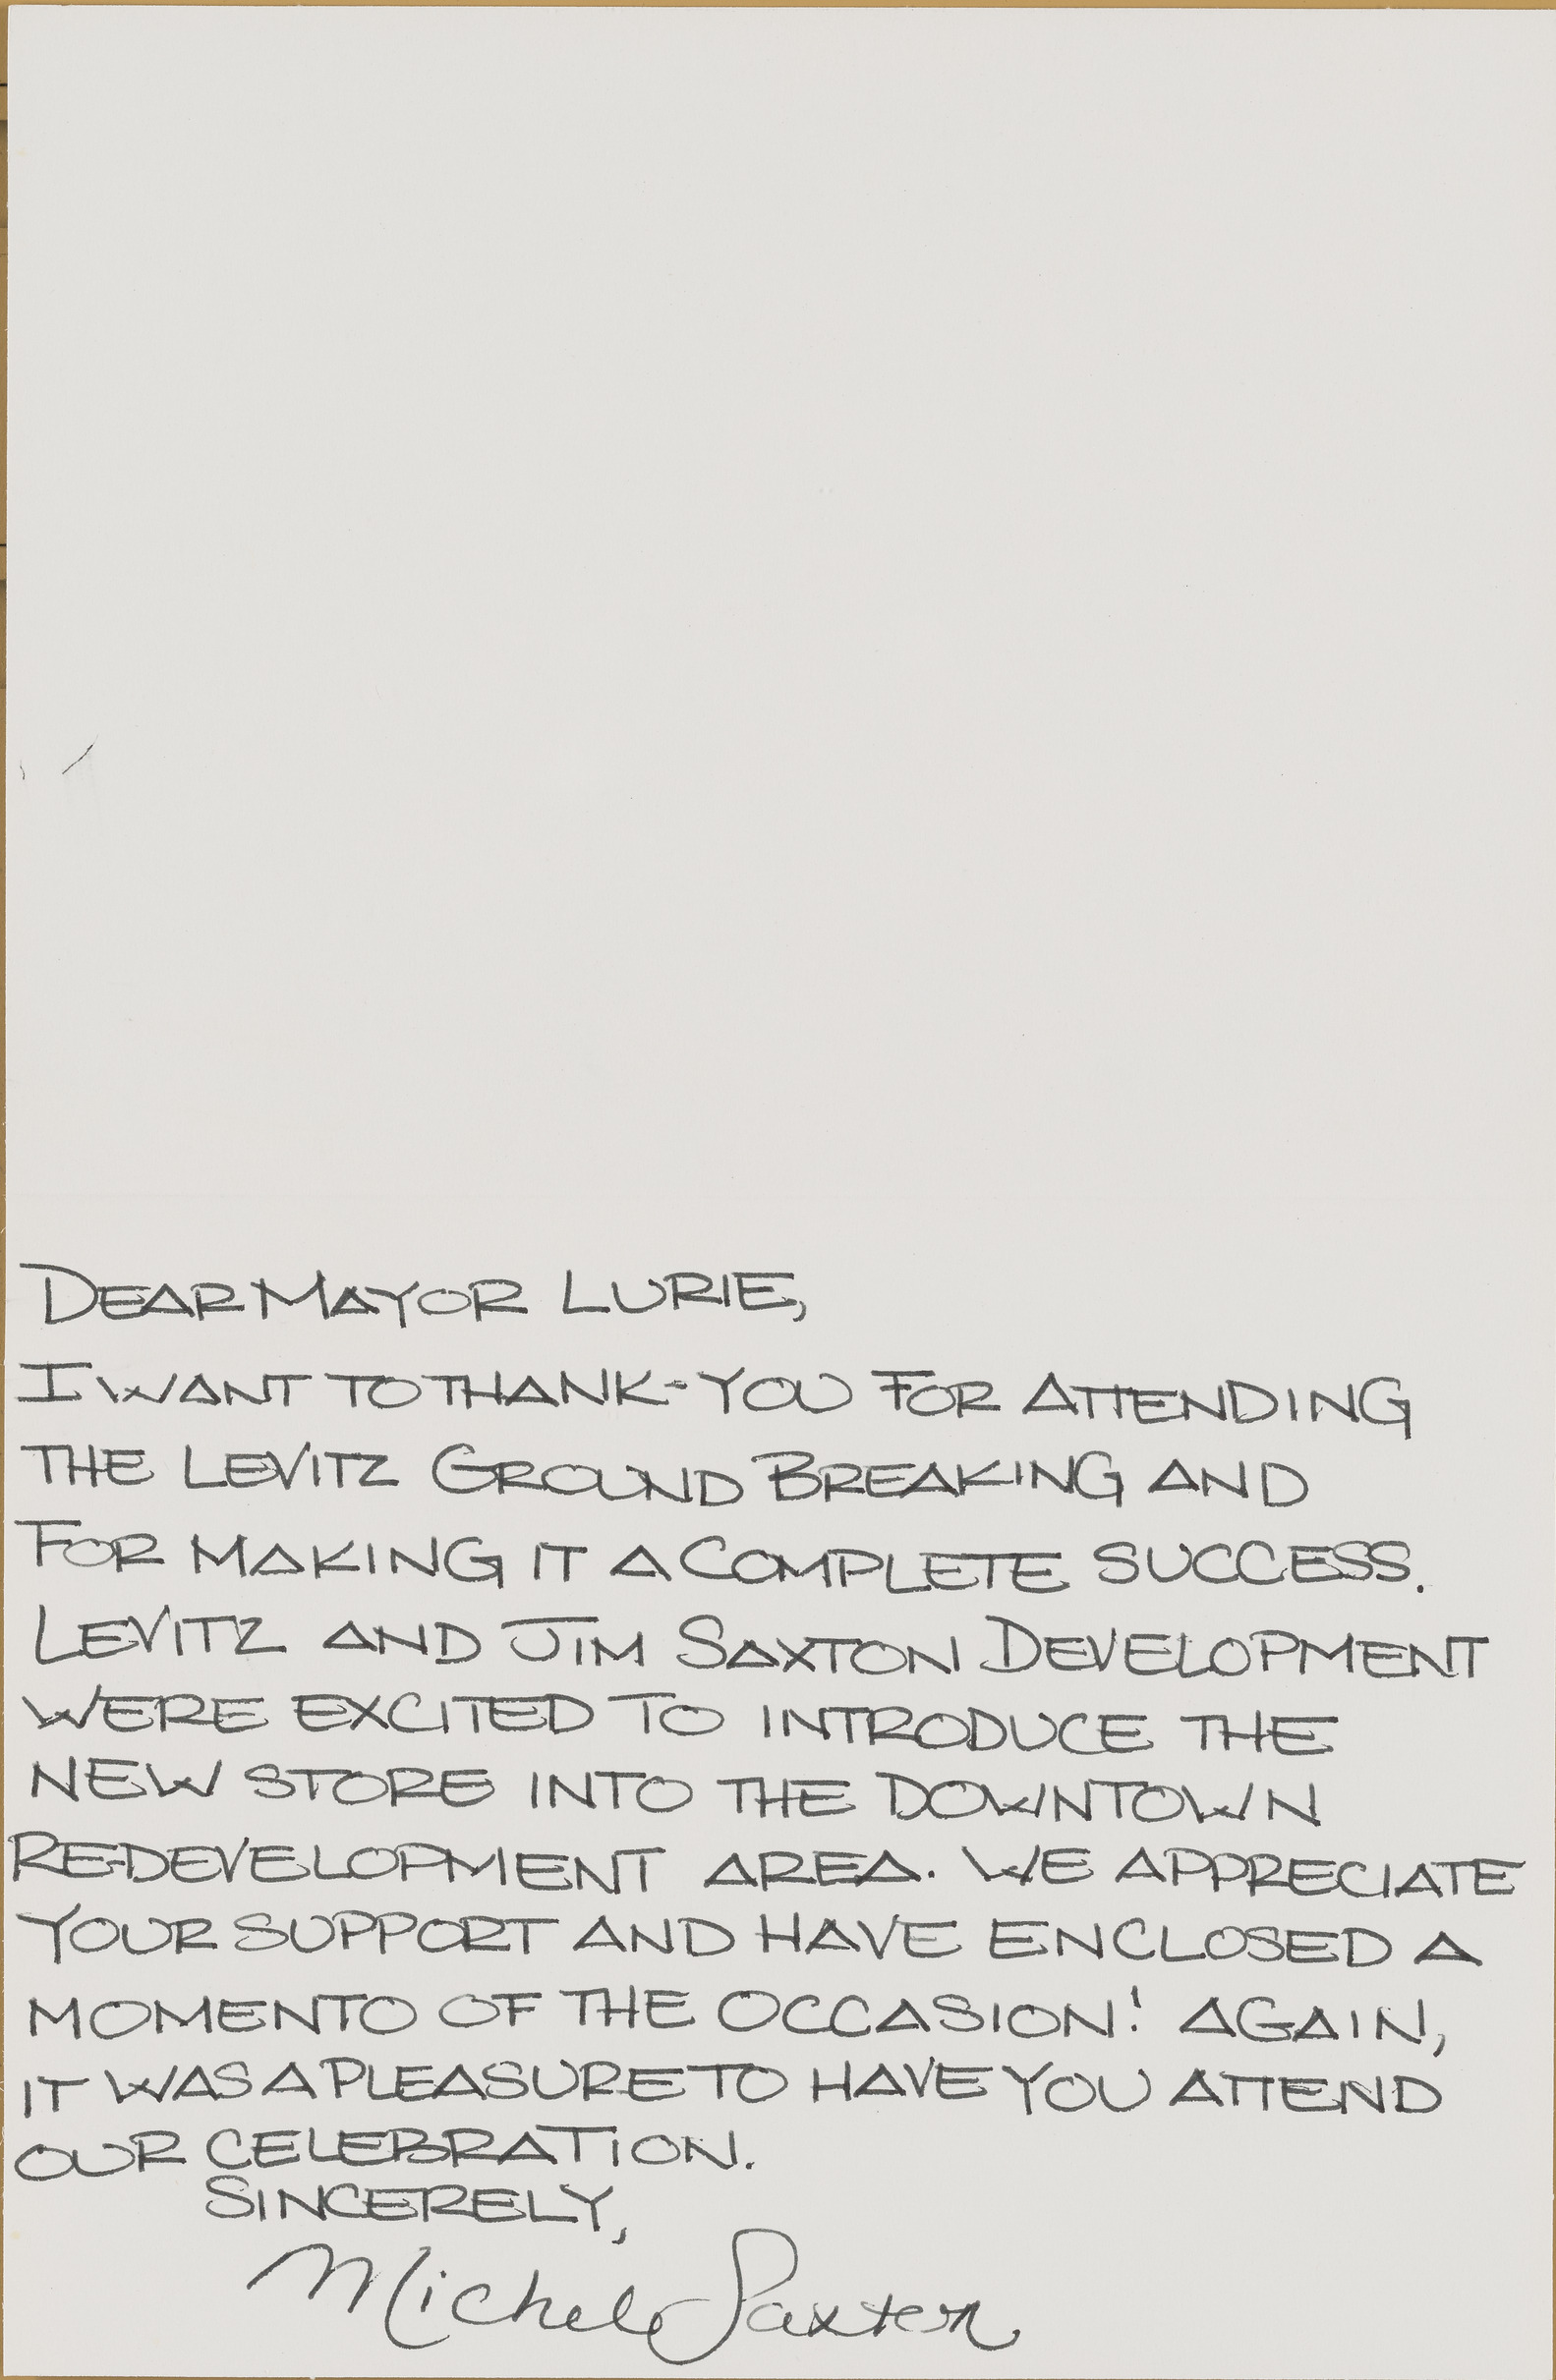 Thank you note to Ron Lurie from Michele Saxter, interior